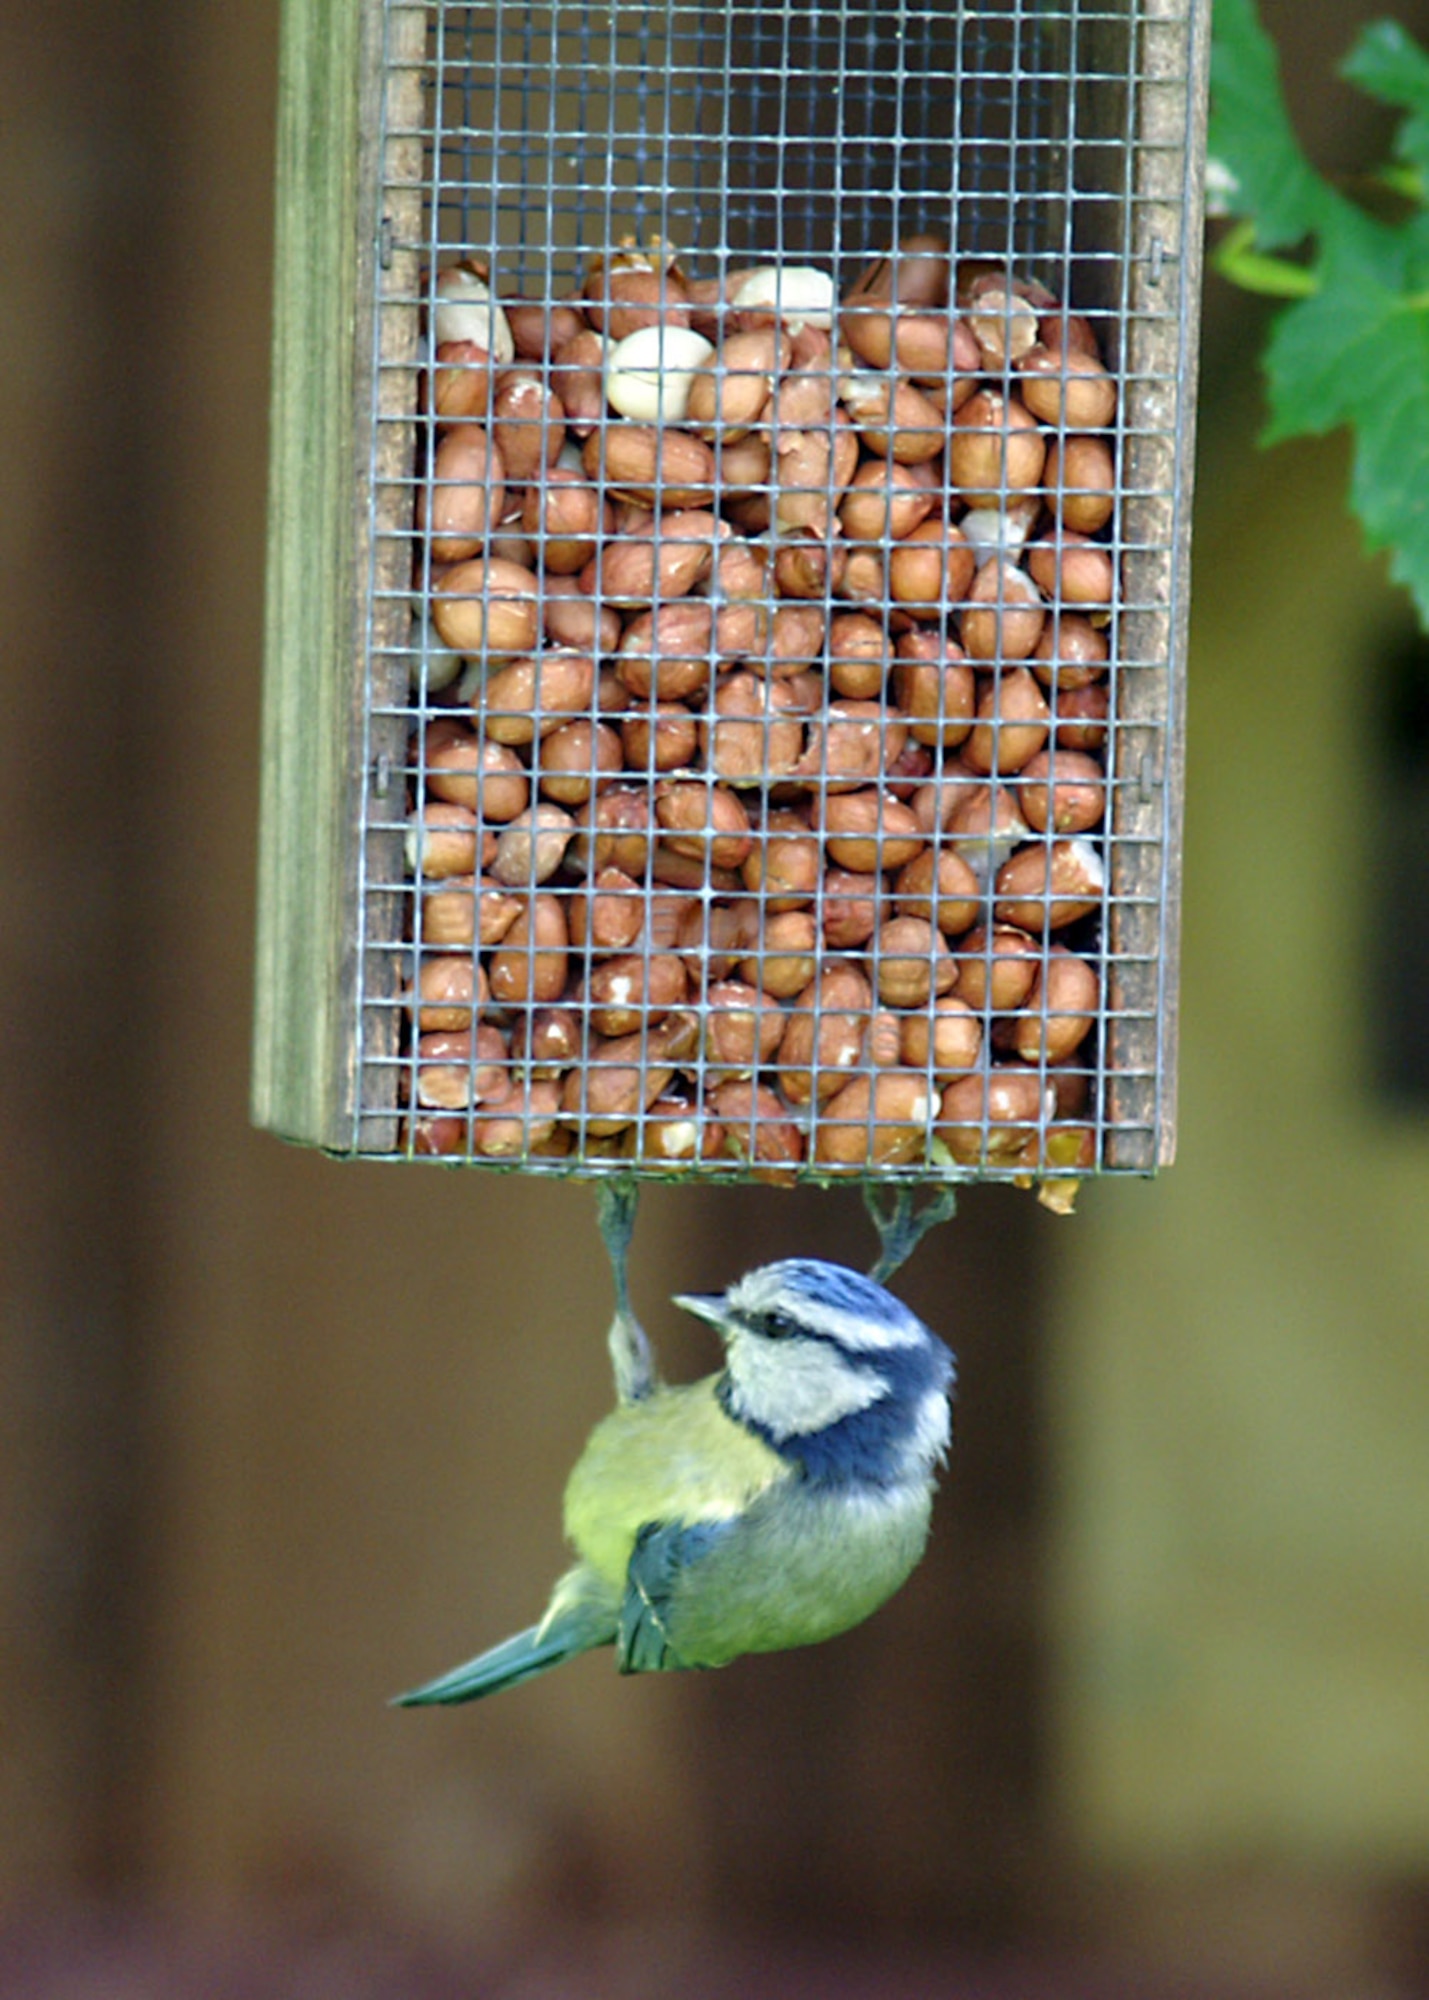 Birds like the blue tit shown here love peanuts. (U.S. Air Force photo by Judith Wakelam)